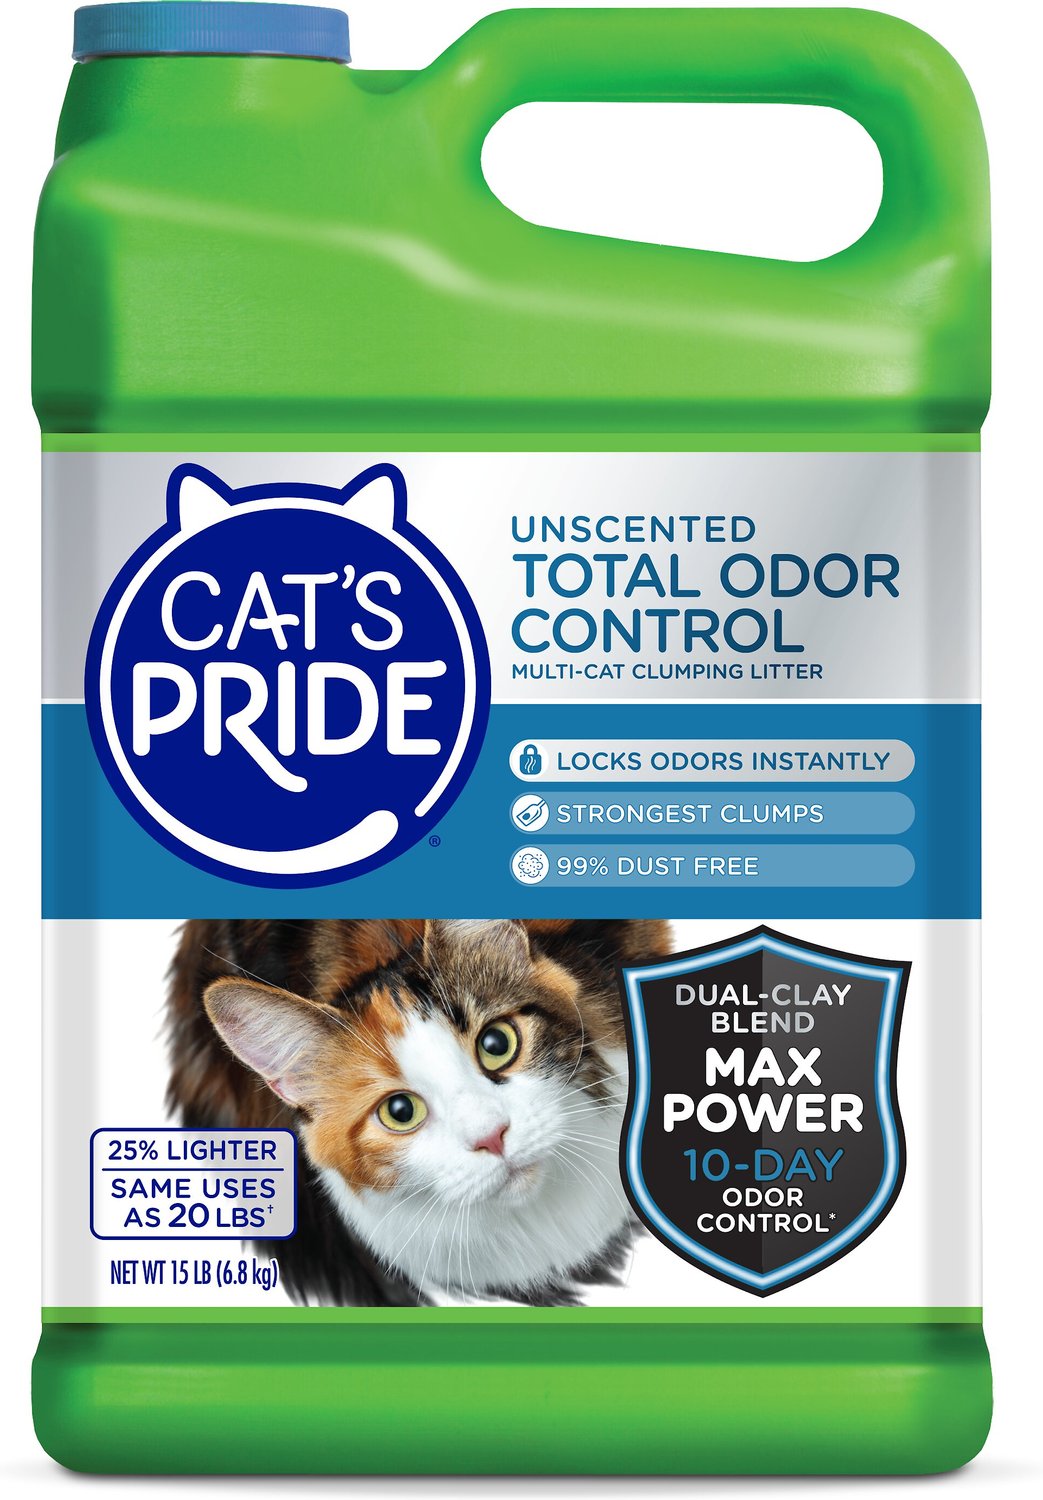 Cat's Pride Total Odor Control Unscented MultiCat Clumping Litter, 15